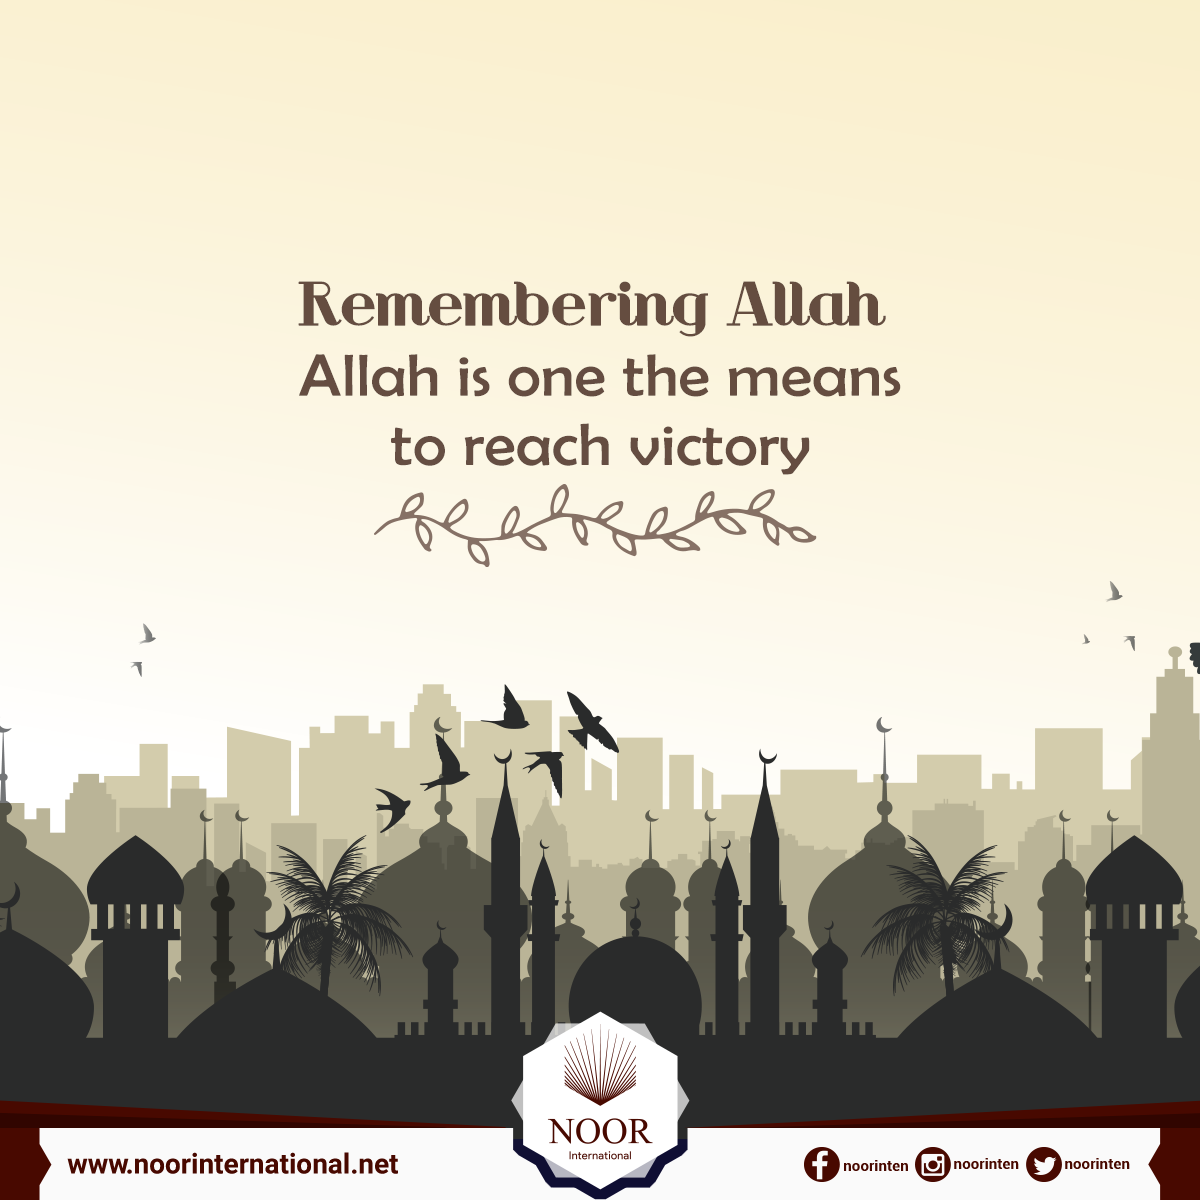 Remembering Allah is one the means to reach victory